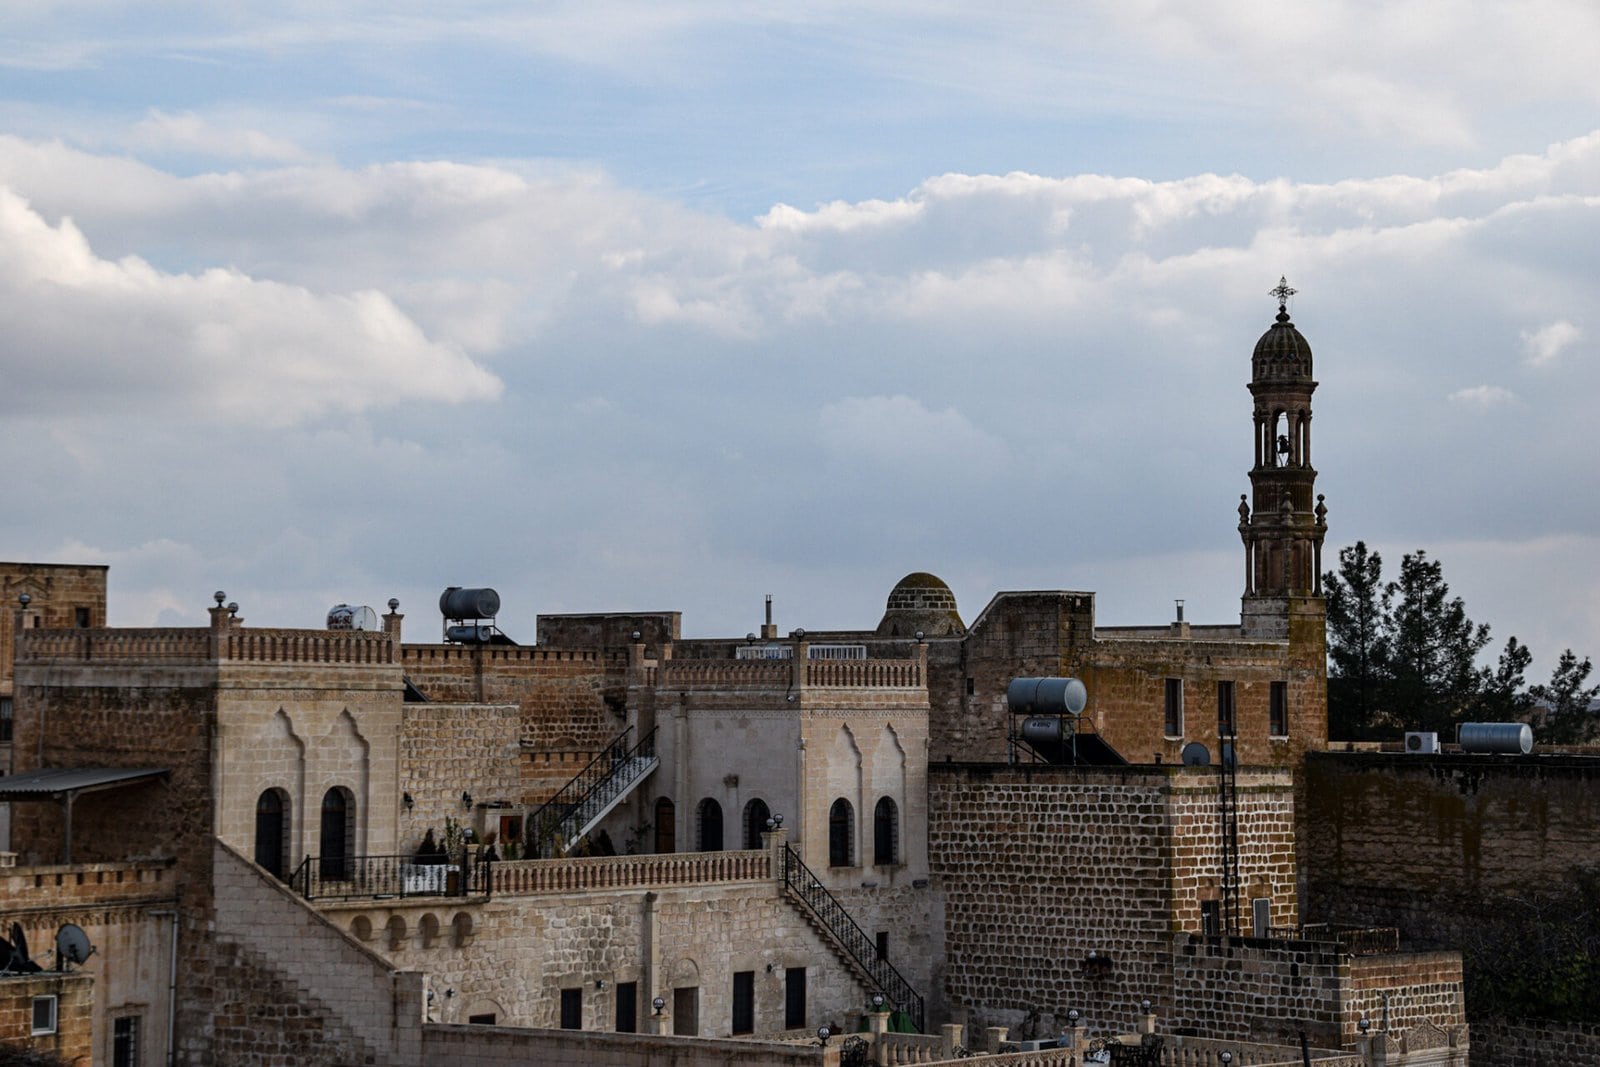 clouds tower over the level rooftops and minarets of Midyat